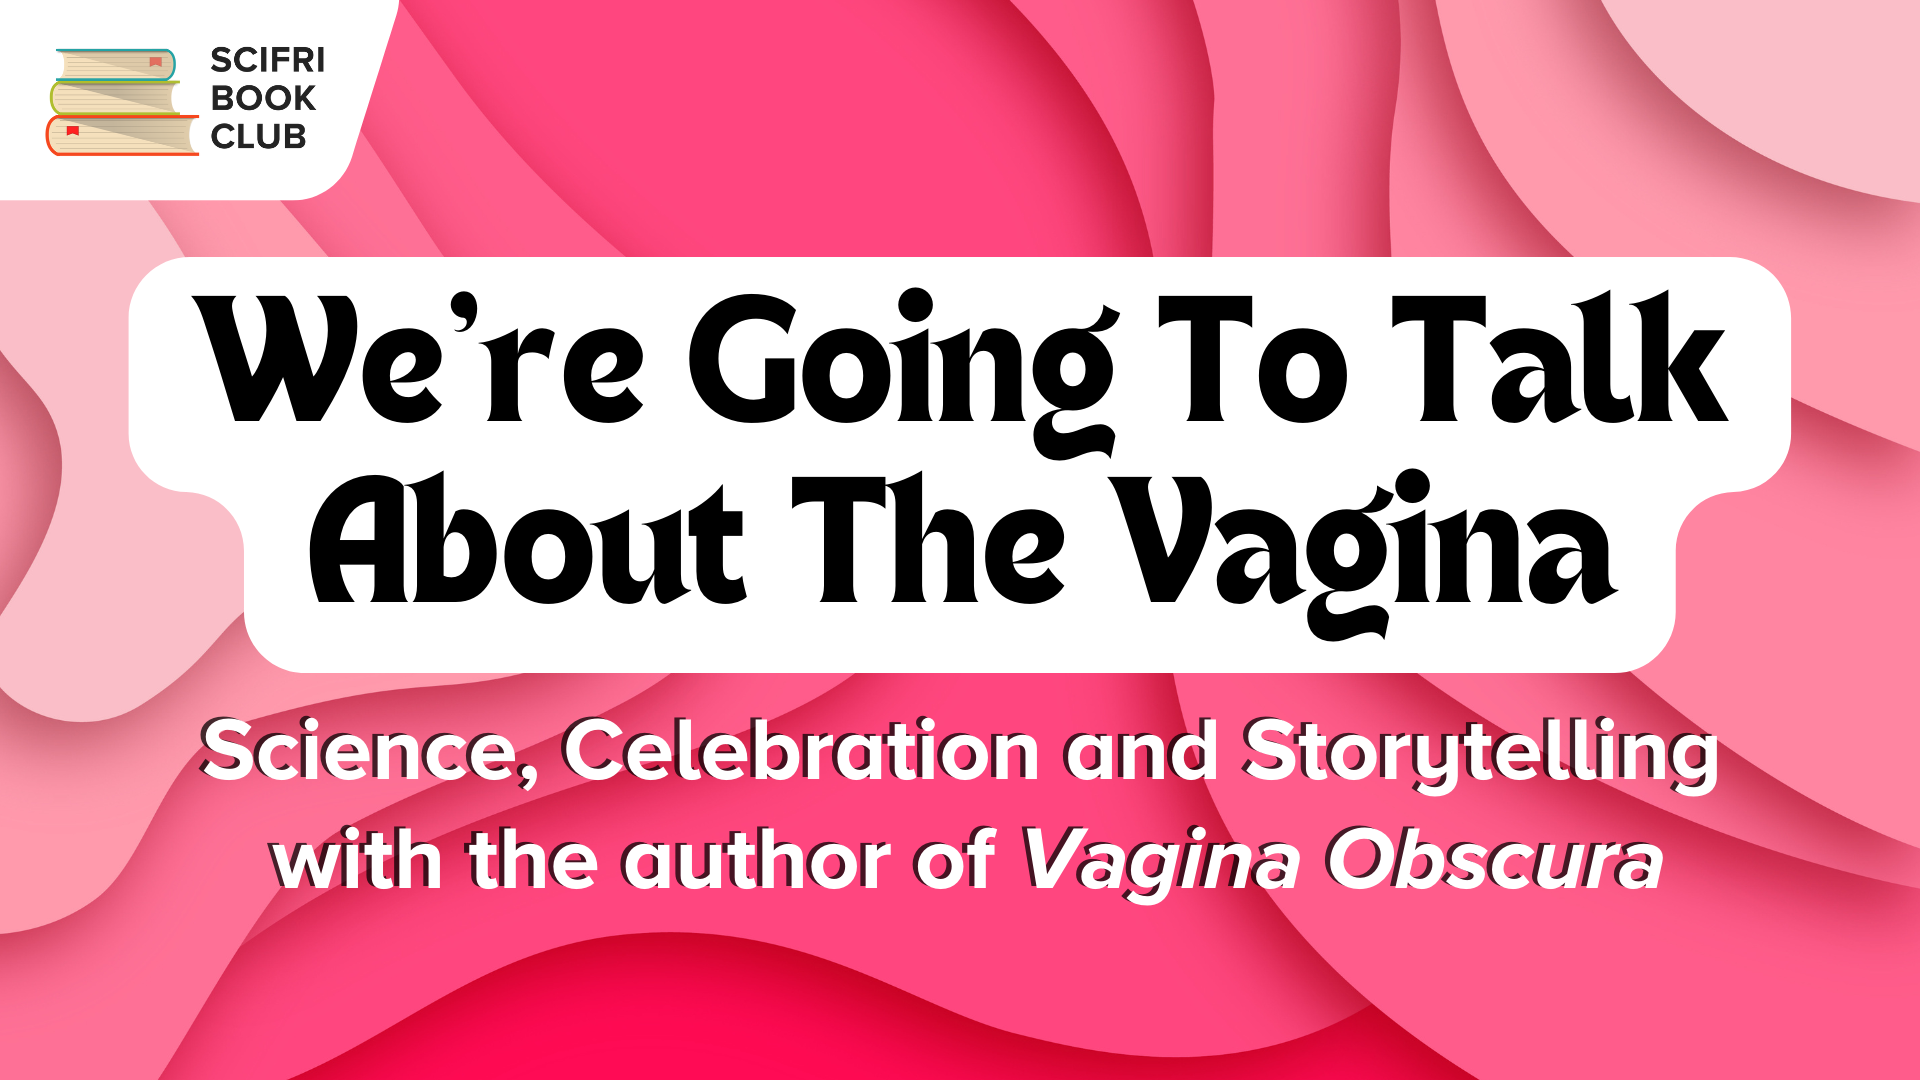 event banner image for an event titled "we're going to talk about the vagina: science, celebration and storytelling with the author of Vagina Obscura" with a background of wavy cut pieces of pink paper